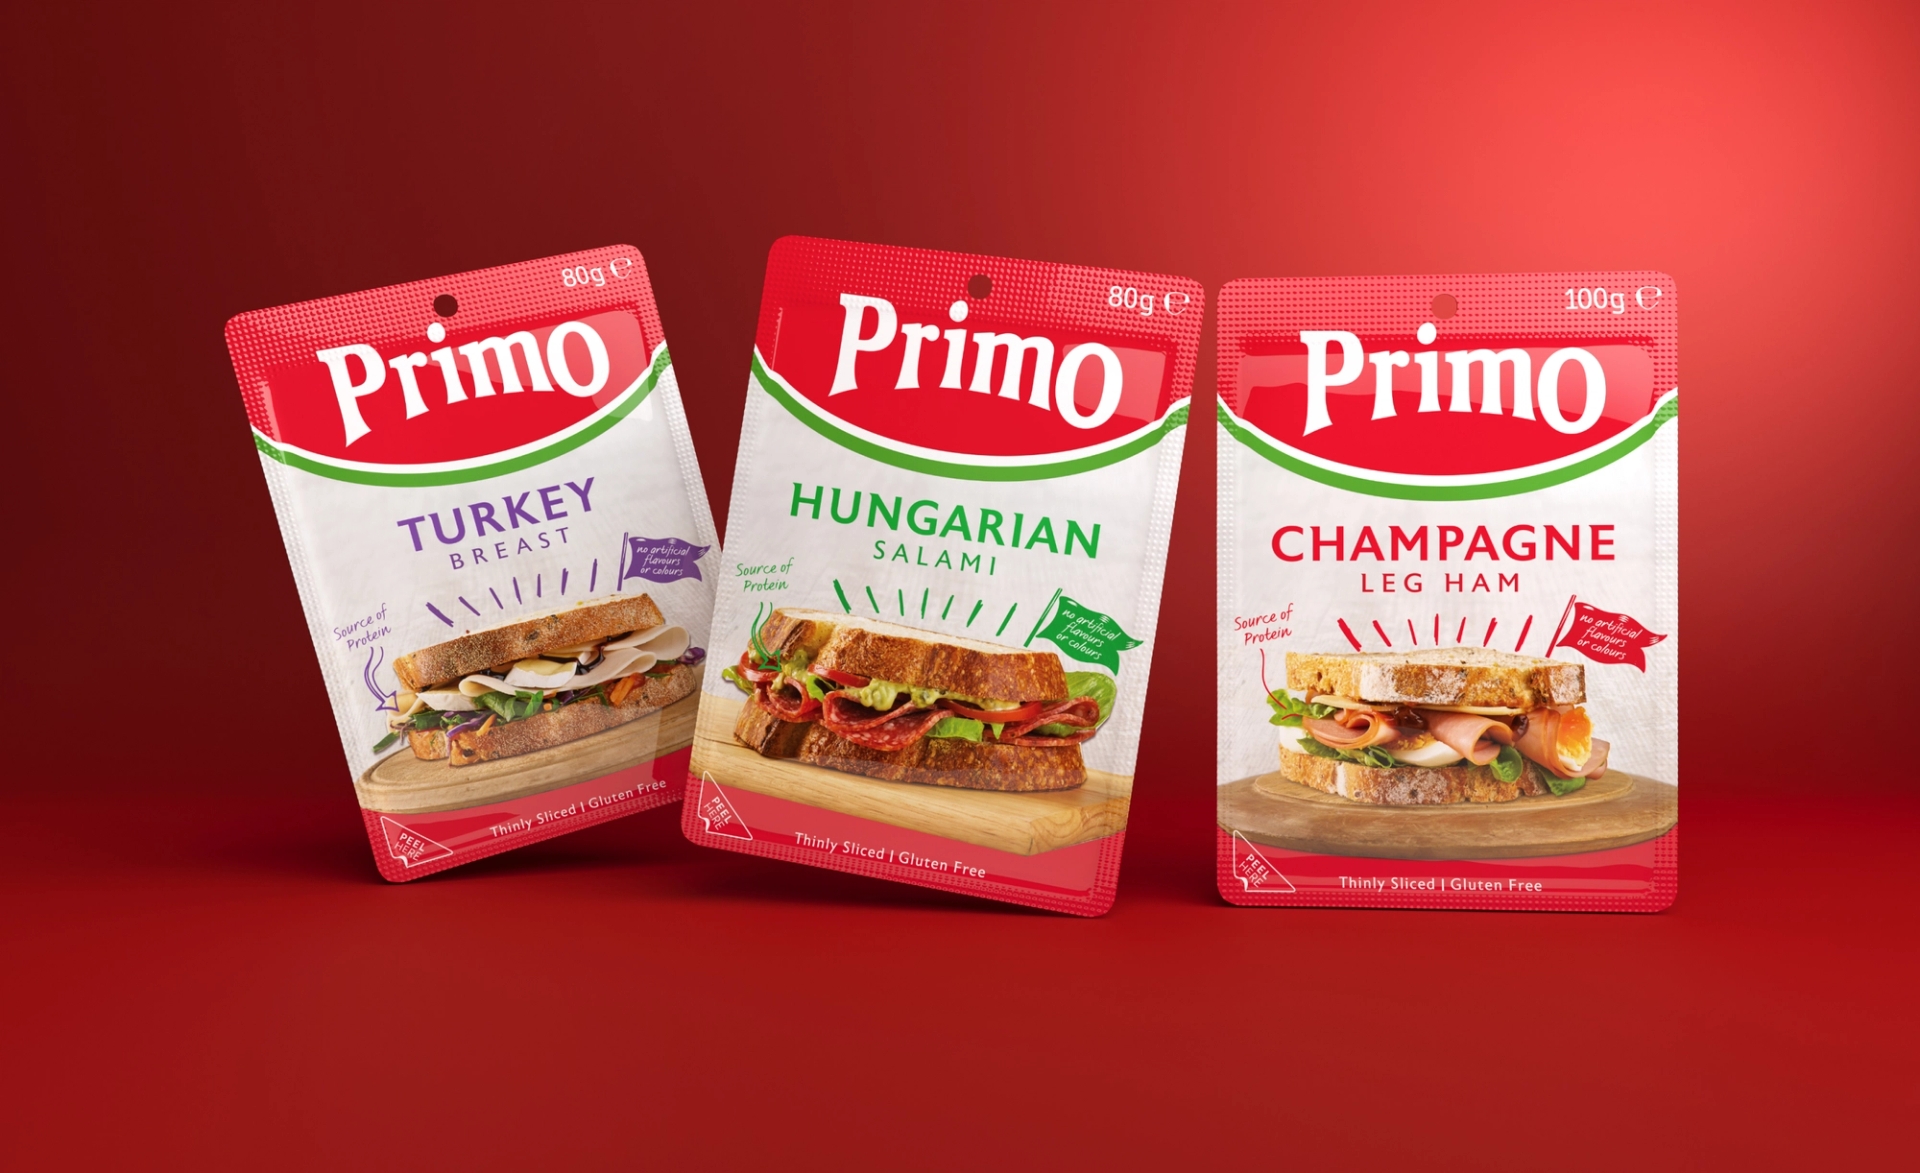 Primo brand design and Primo packaging design for Turkey Breast, Hungarian Salami, and Champagne leg ham products by packaging design by Our Revolution